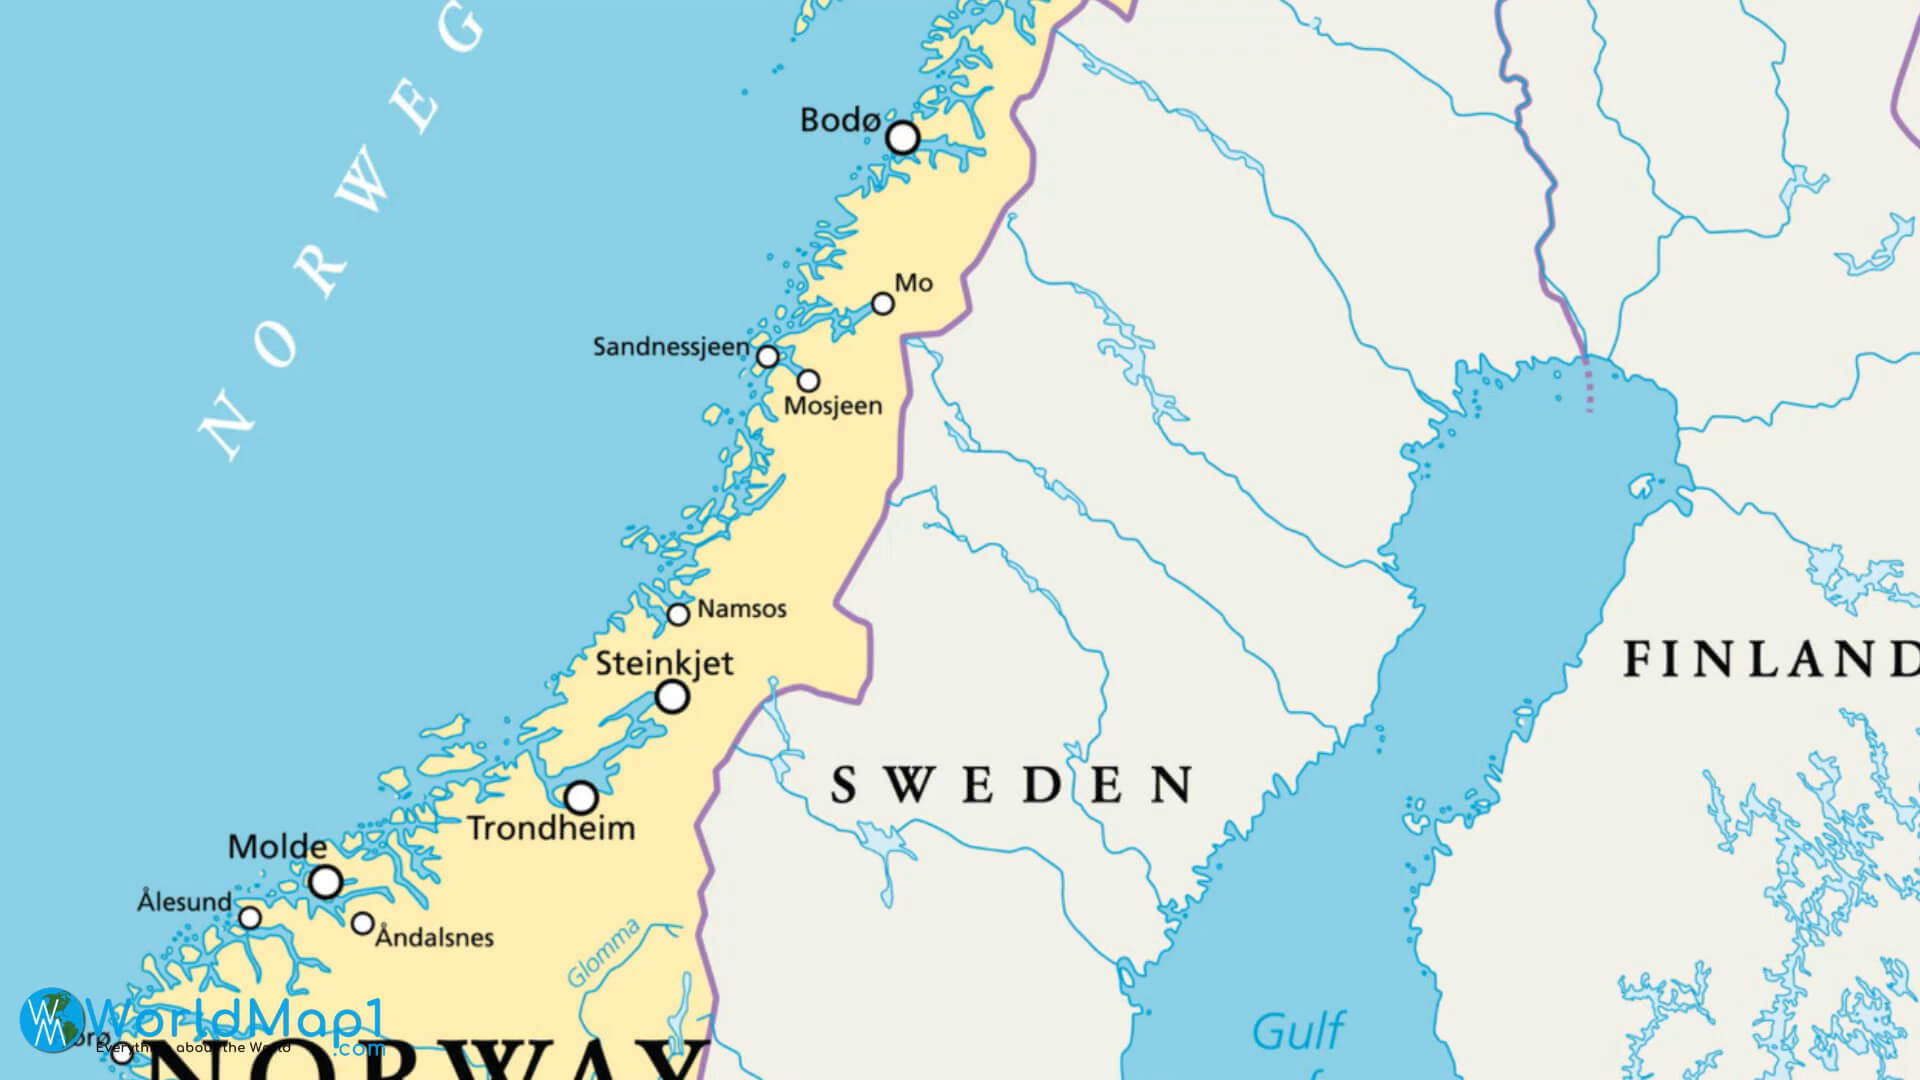 North Norway Map and Sweden